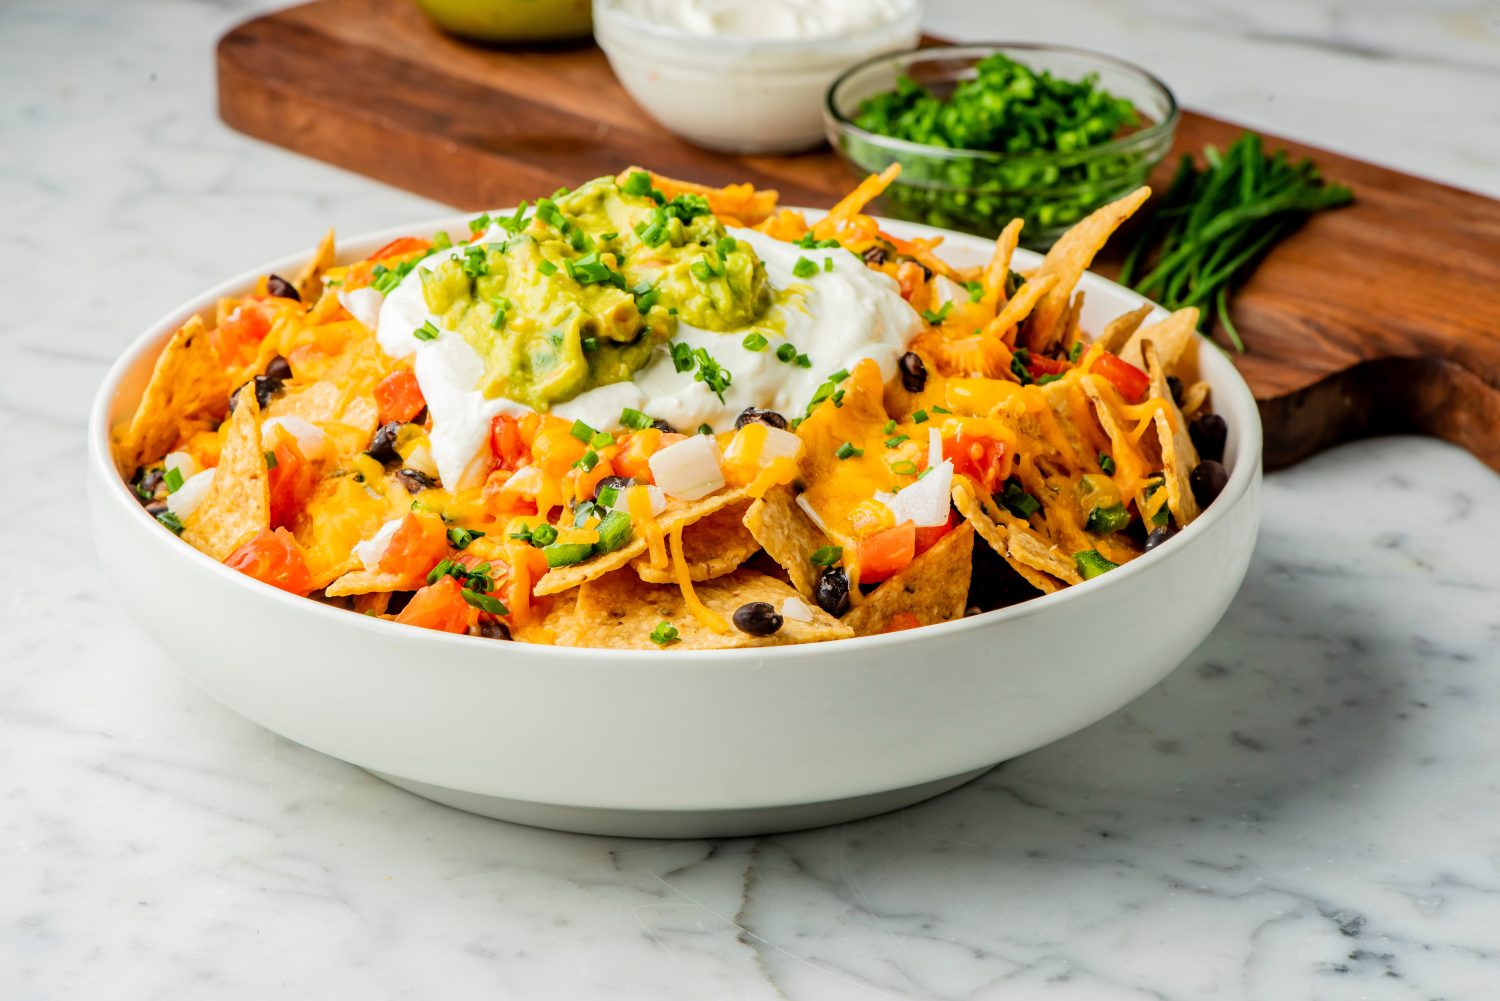 Nachos. Crispy tortilla chips topped with melted cheddar cheese, salsa, black beans, jalapenos, guacamole, sour cream and lettuce. Tex-Mex or Mexican restaurant classic traditional menu item.